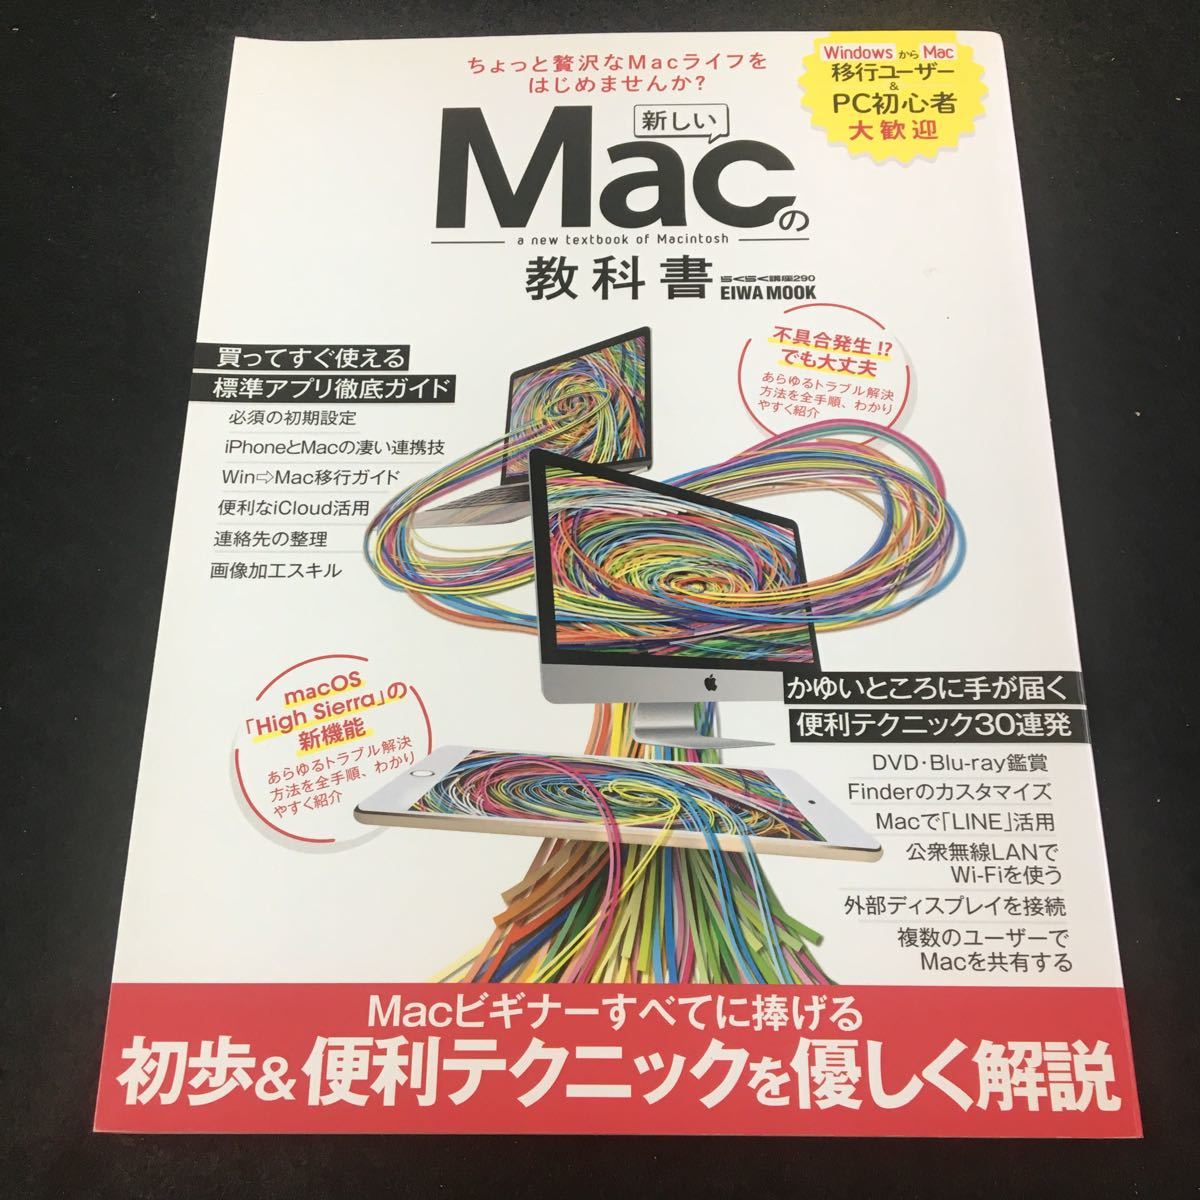 M6a-060 comfortably course 290 new Mac. textbook a bit luxurious Mac life . beginning not .? PC explanation guide Appli Wi-Fi EIWA MOOK